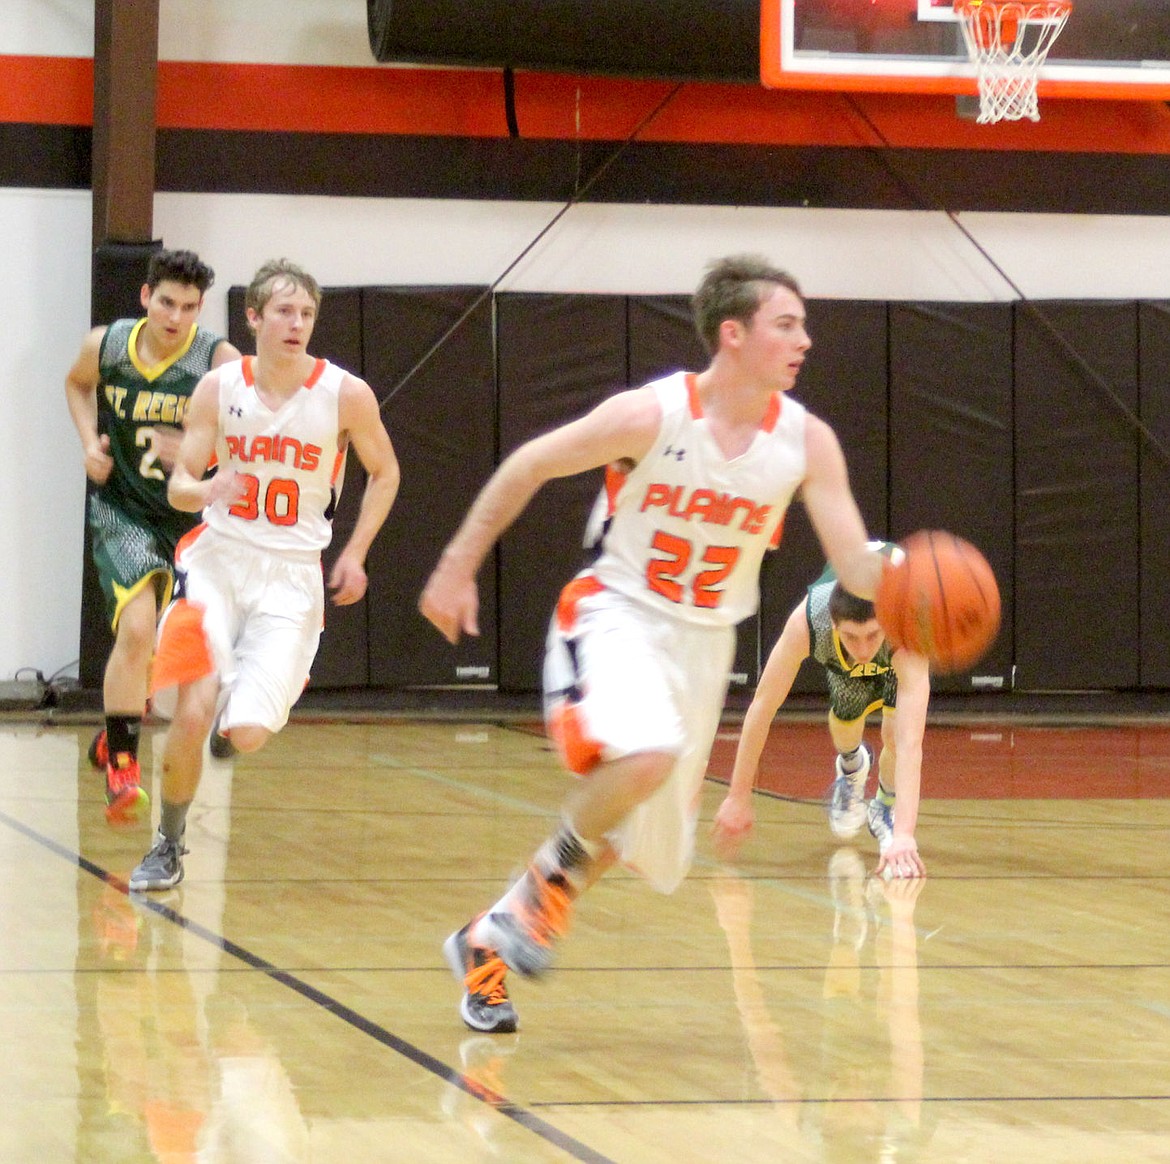 &lt;p&gt;&lt;strong&gt;Alec Cole moves the ball down the court after a rebound during a game between the Horsemen and St. Regis Tigers.&lt;/strong&gt;&lt;/p&gt;